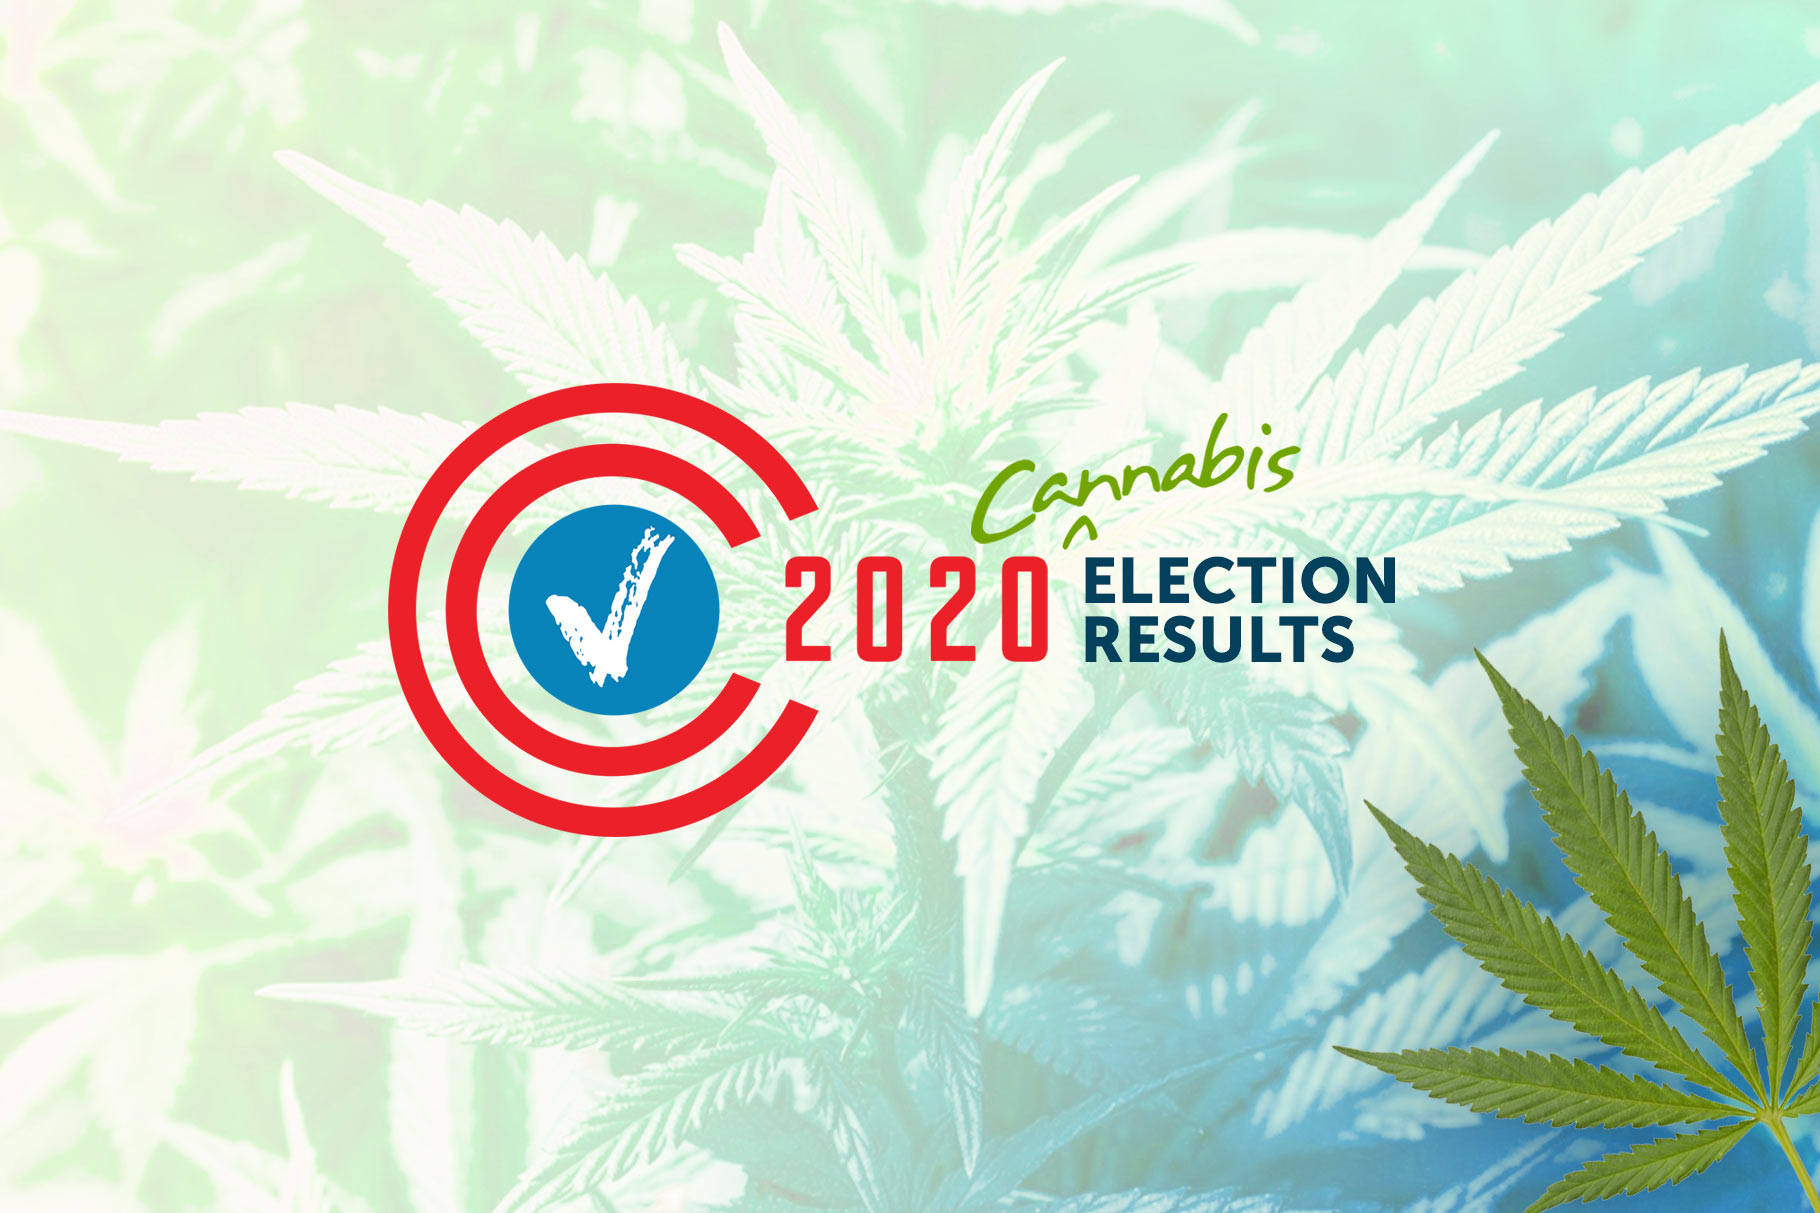 Election 2020: Cannabis Legalization Results